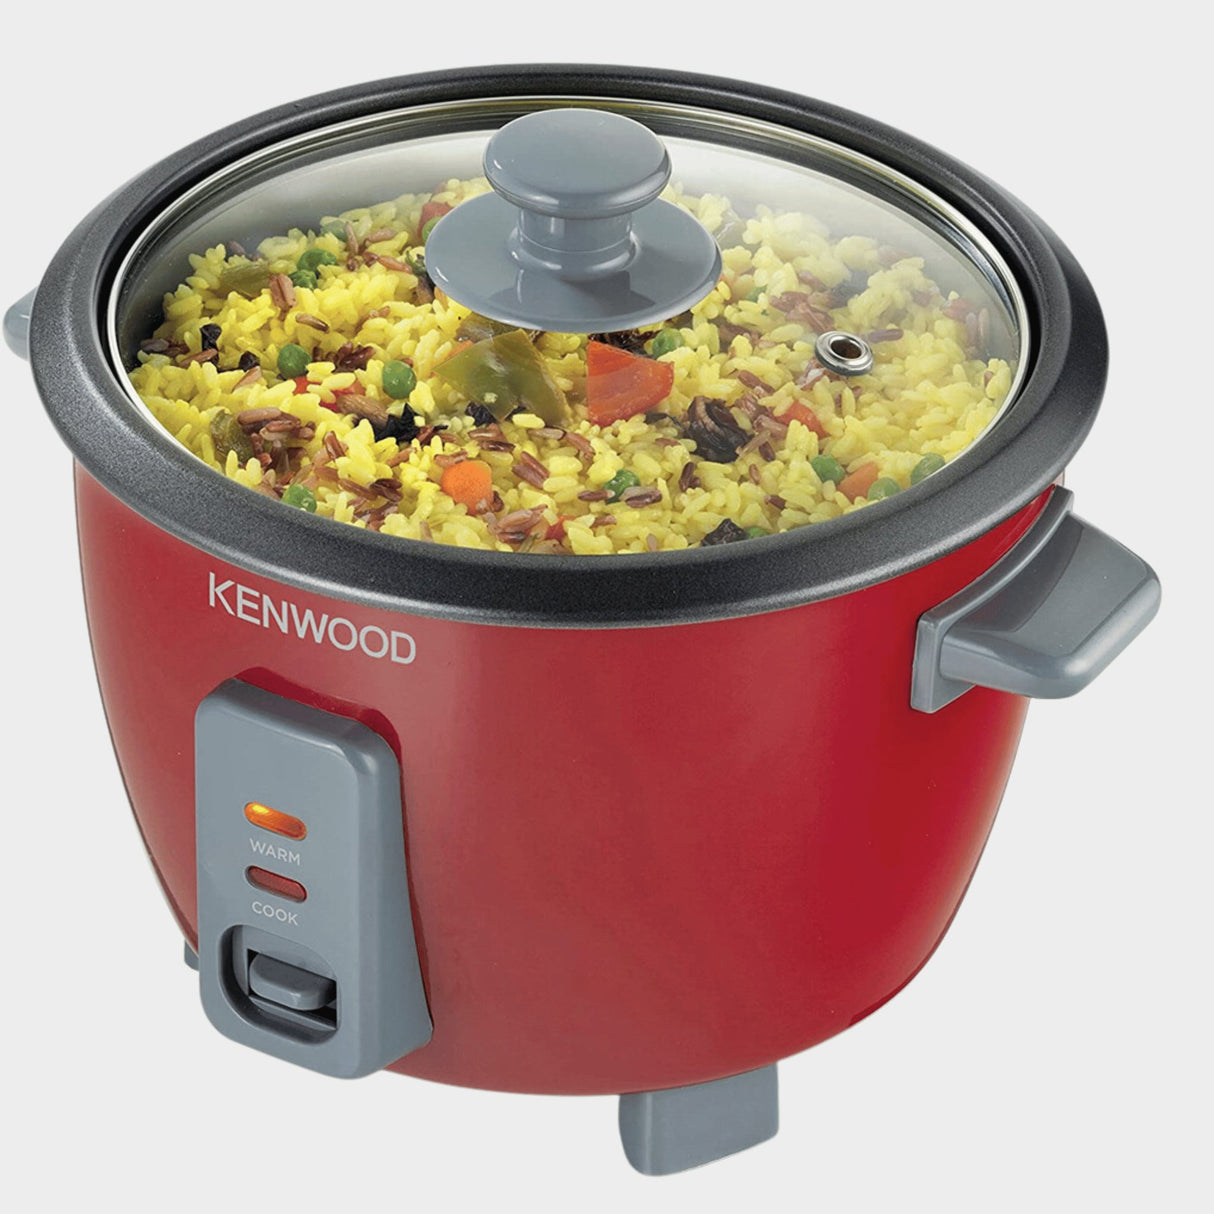 Kenwood 2-in-1 Rice Cooker with Steamer RCM30 - Red - KWT Tech Mart